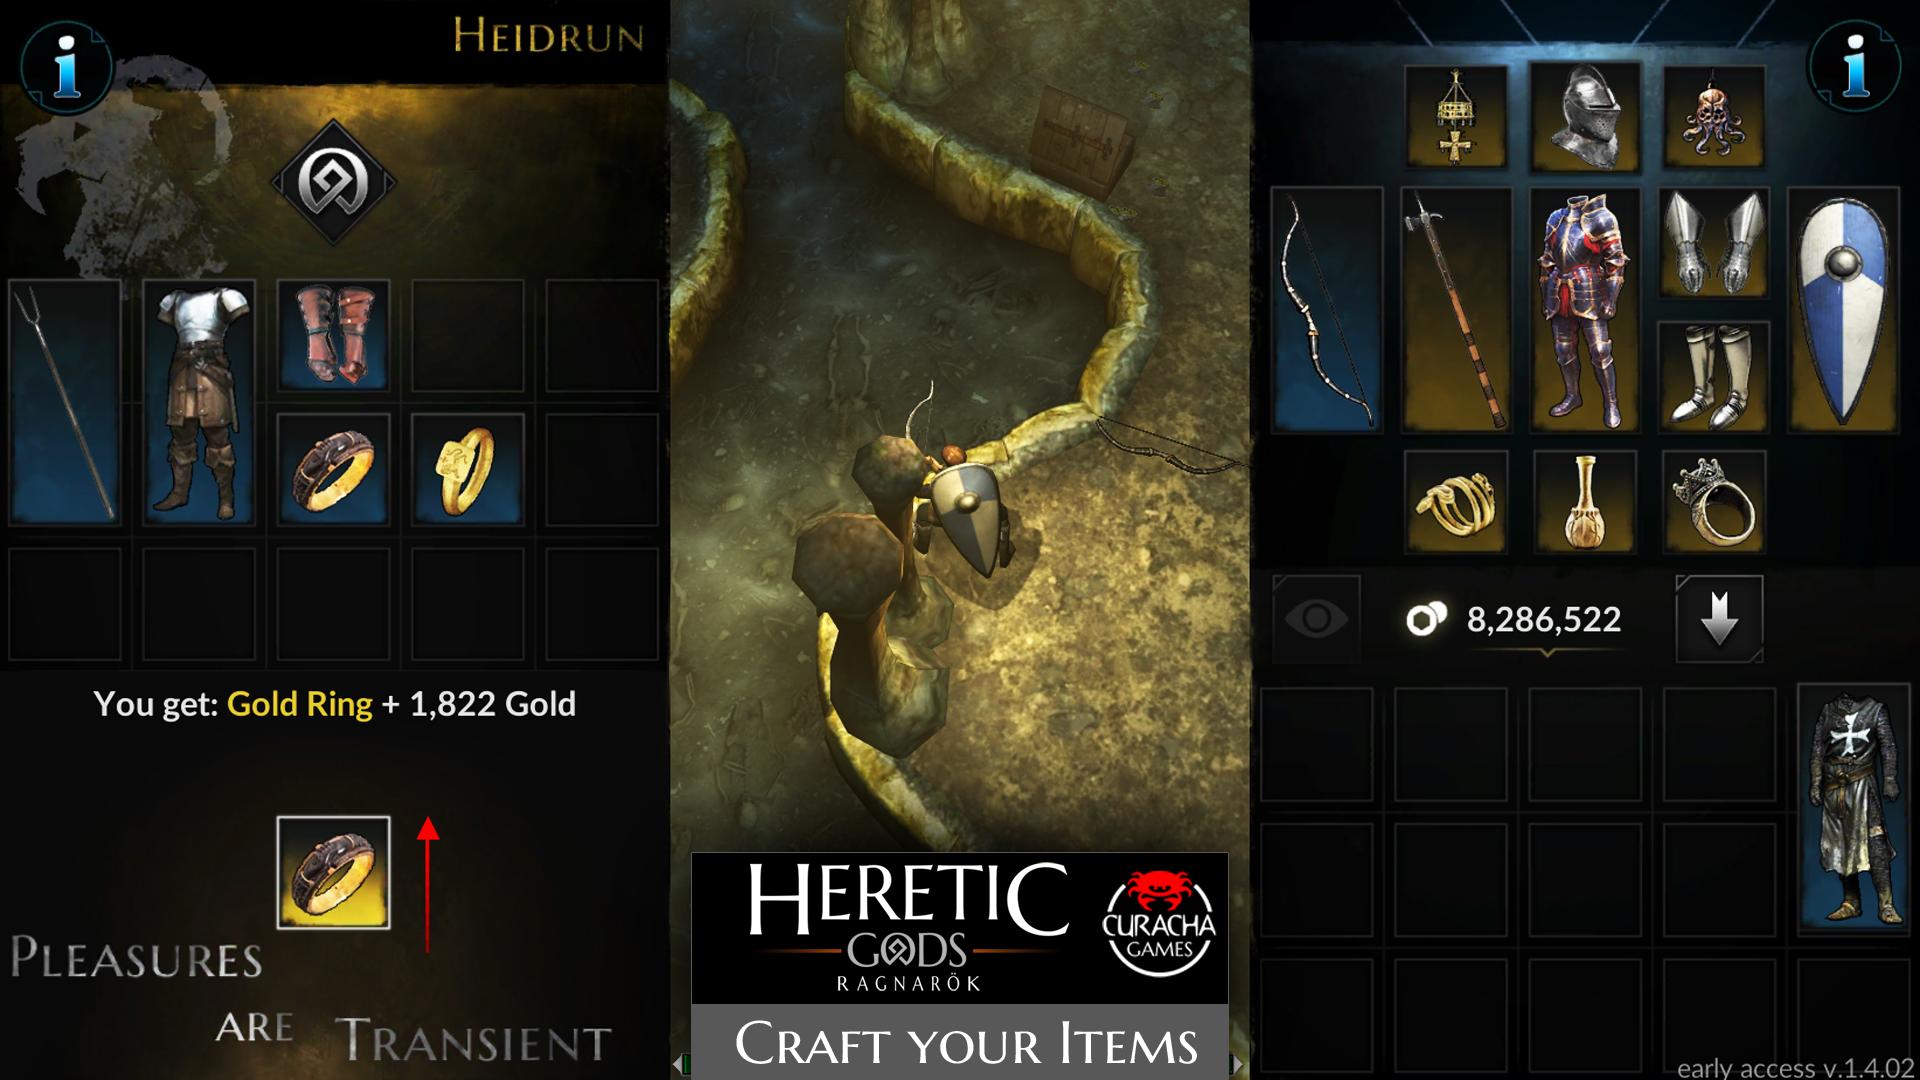 HERETIC GODS for Android - APK Download - 